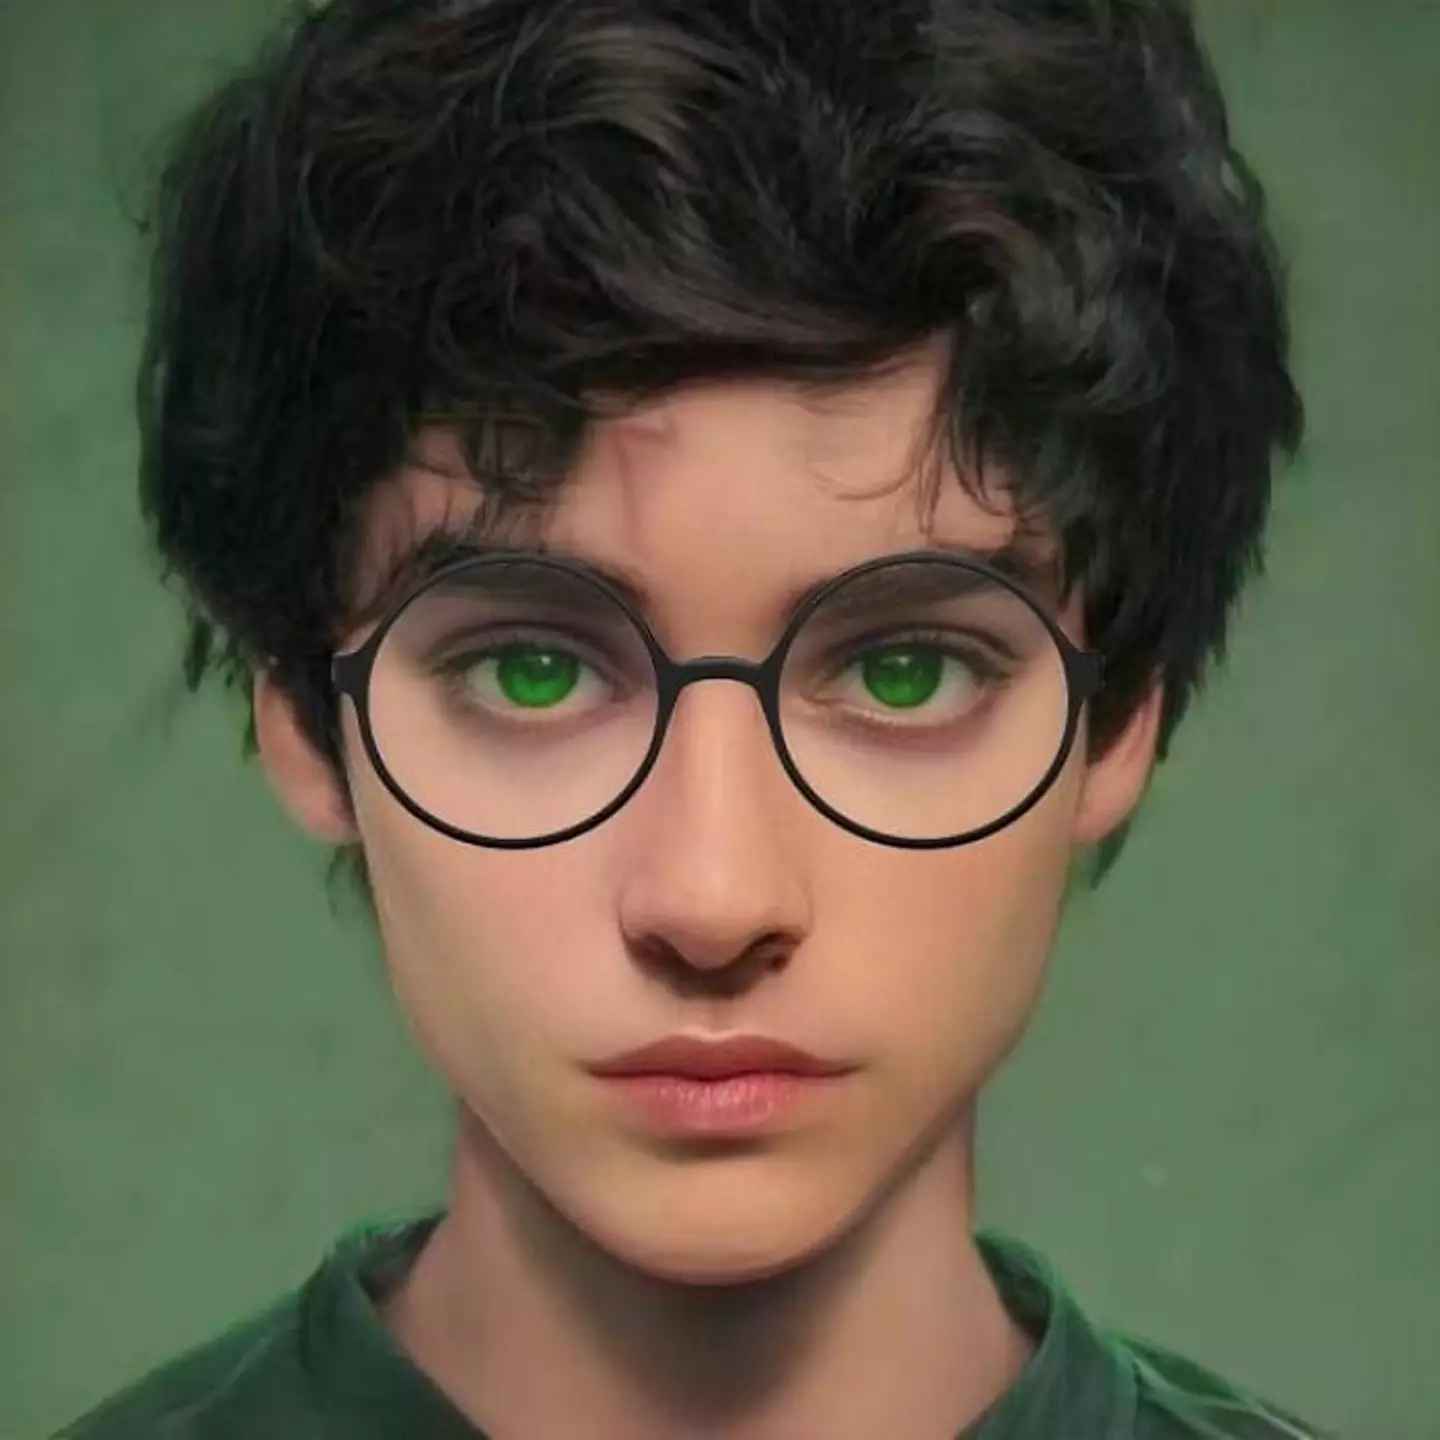 Harry Potter as envisioned by the artist.